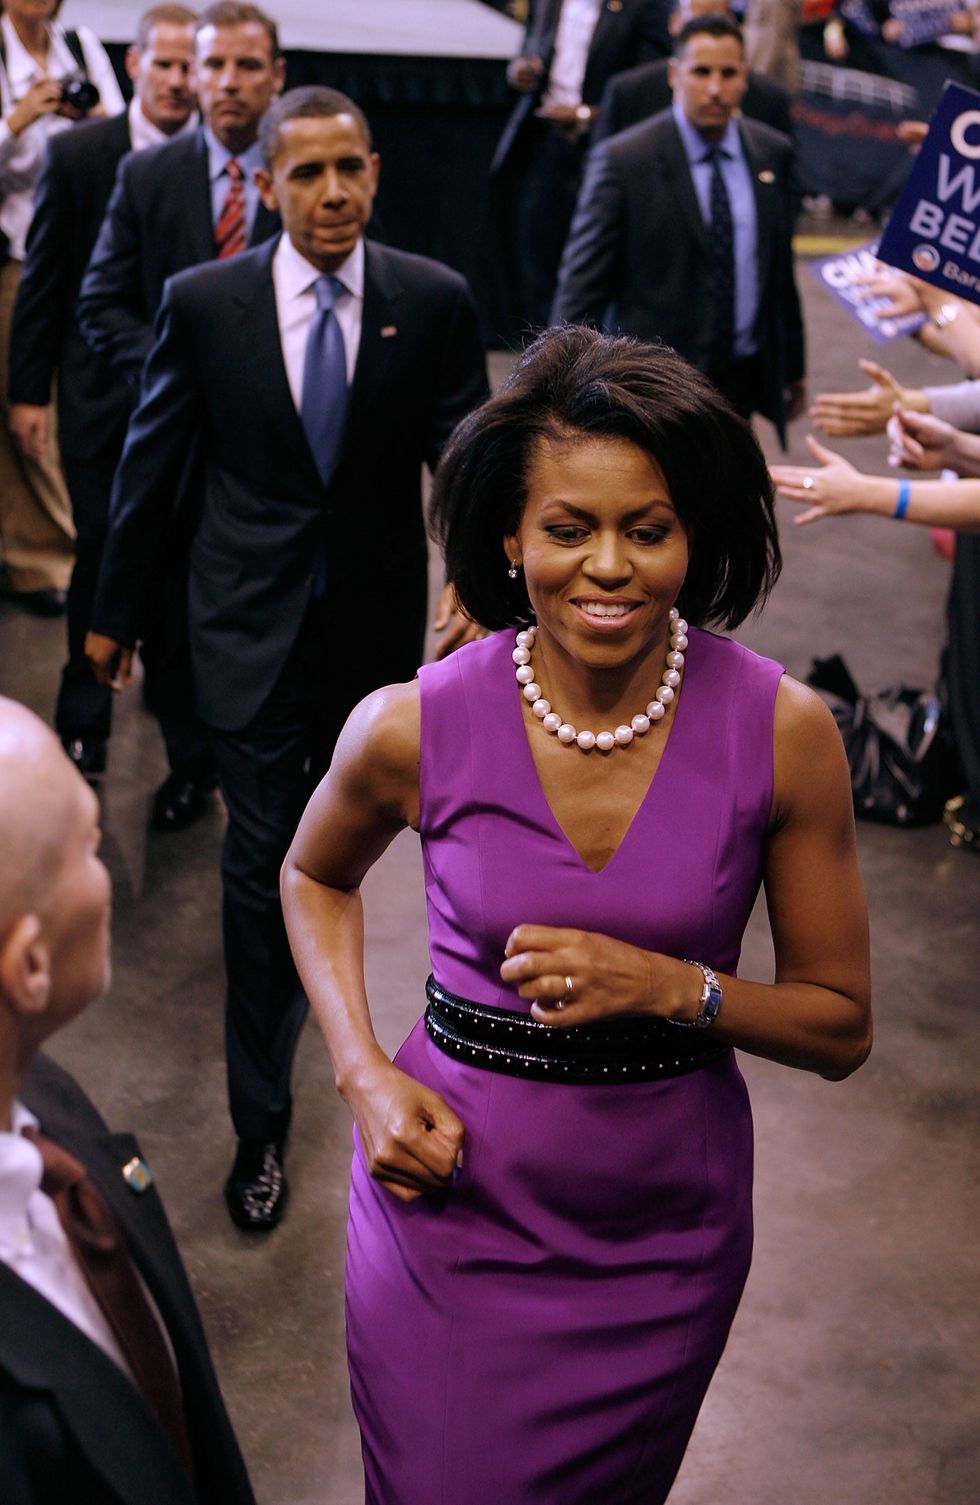 Michelle Obama's toned arms are debated - Los Angeles Times